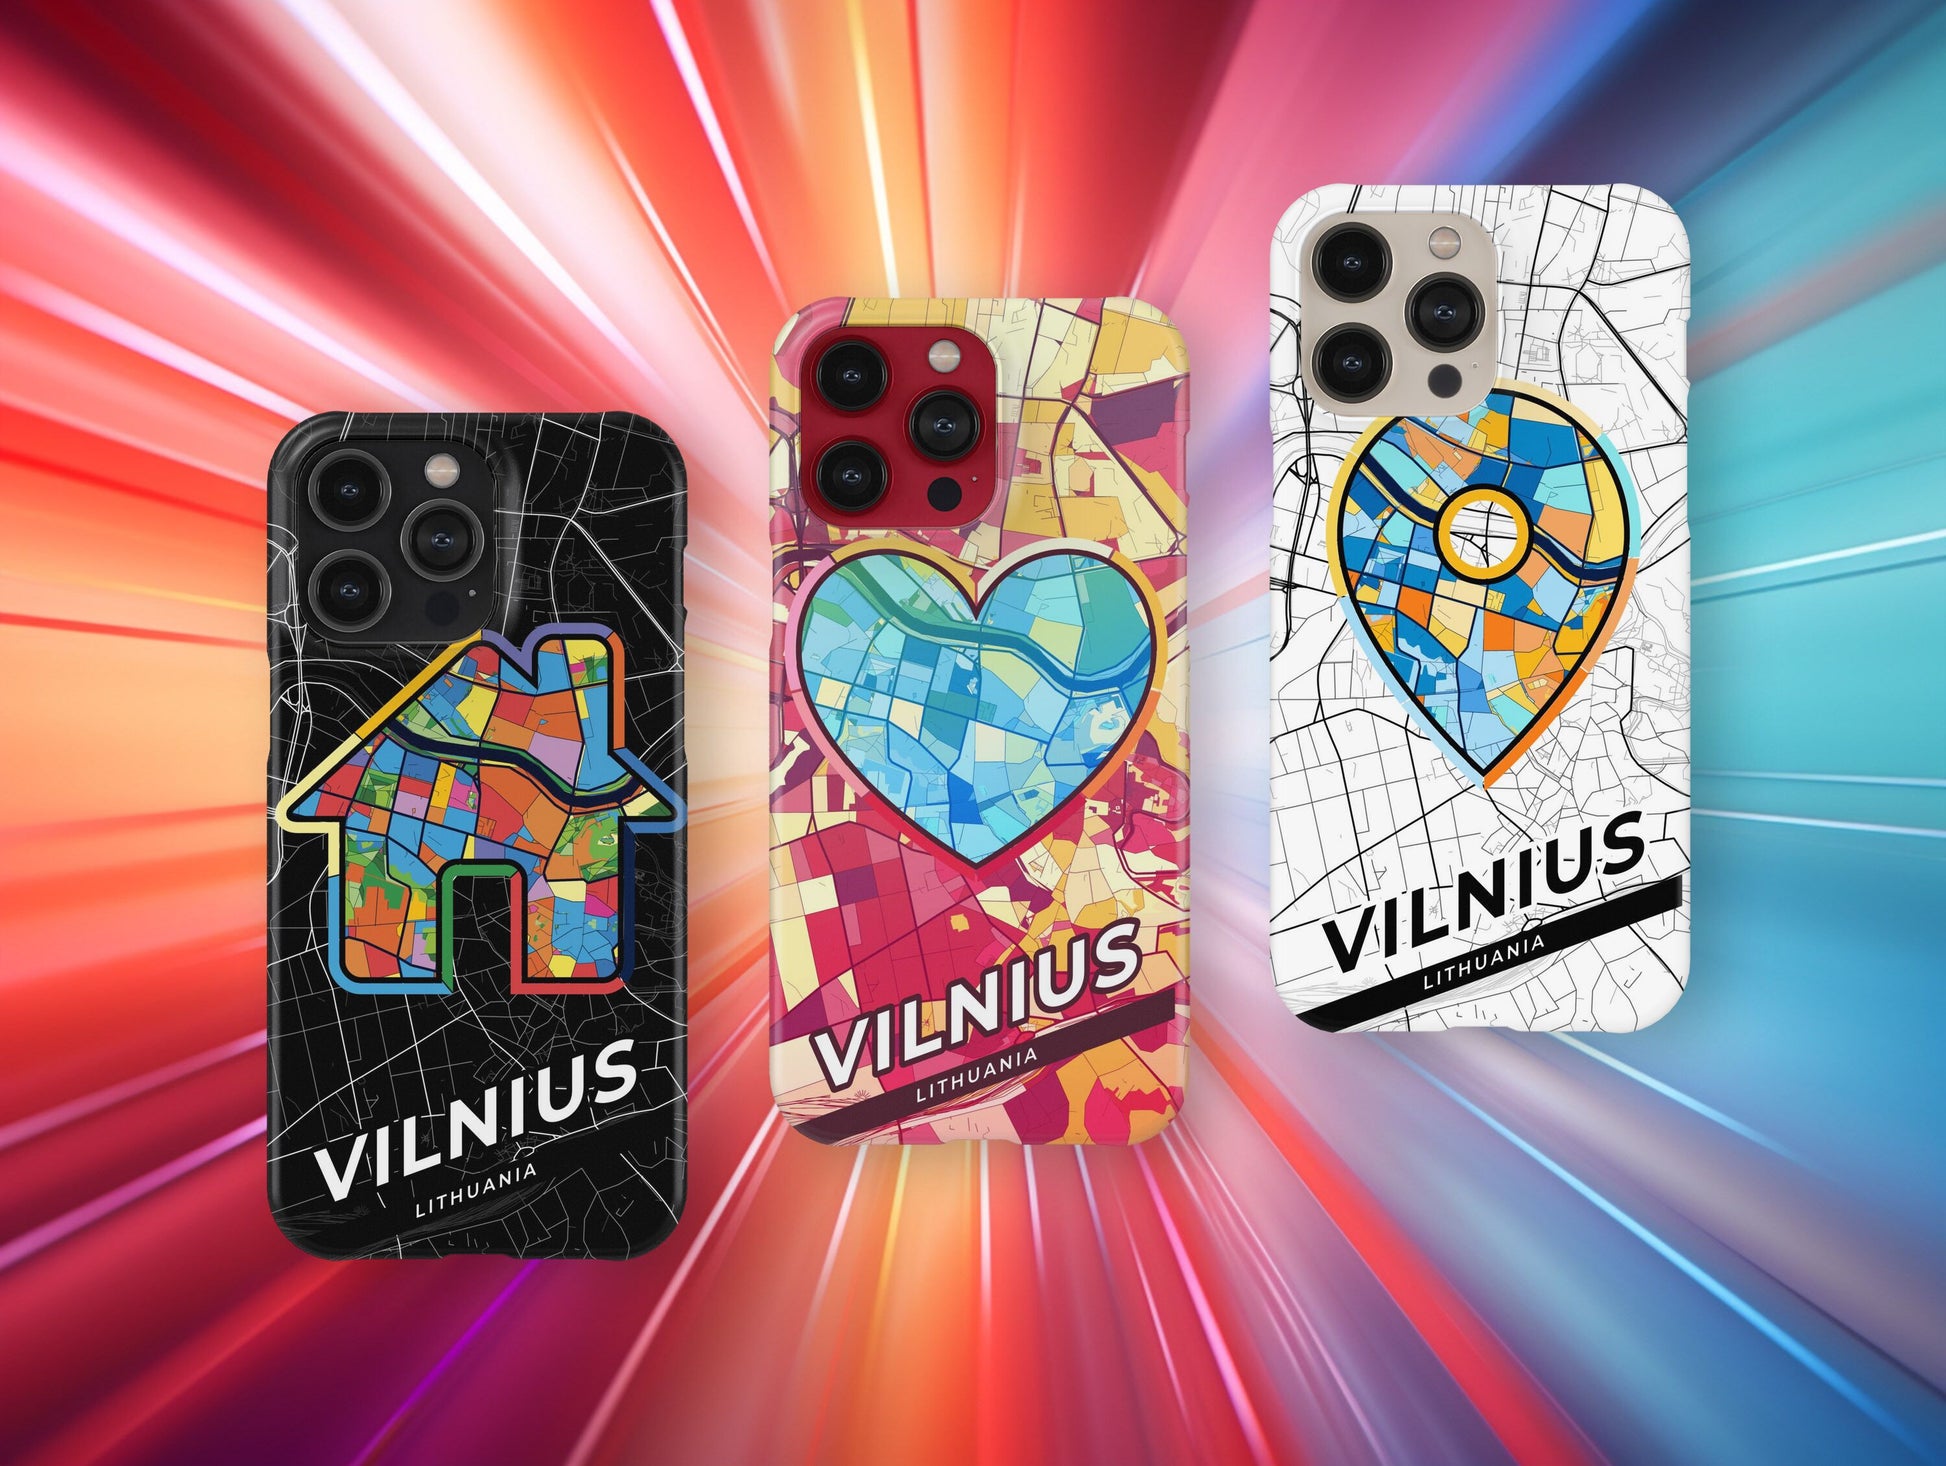 Vilnius Lithuania slim phone case with colorful icon